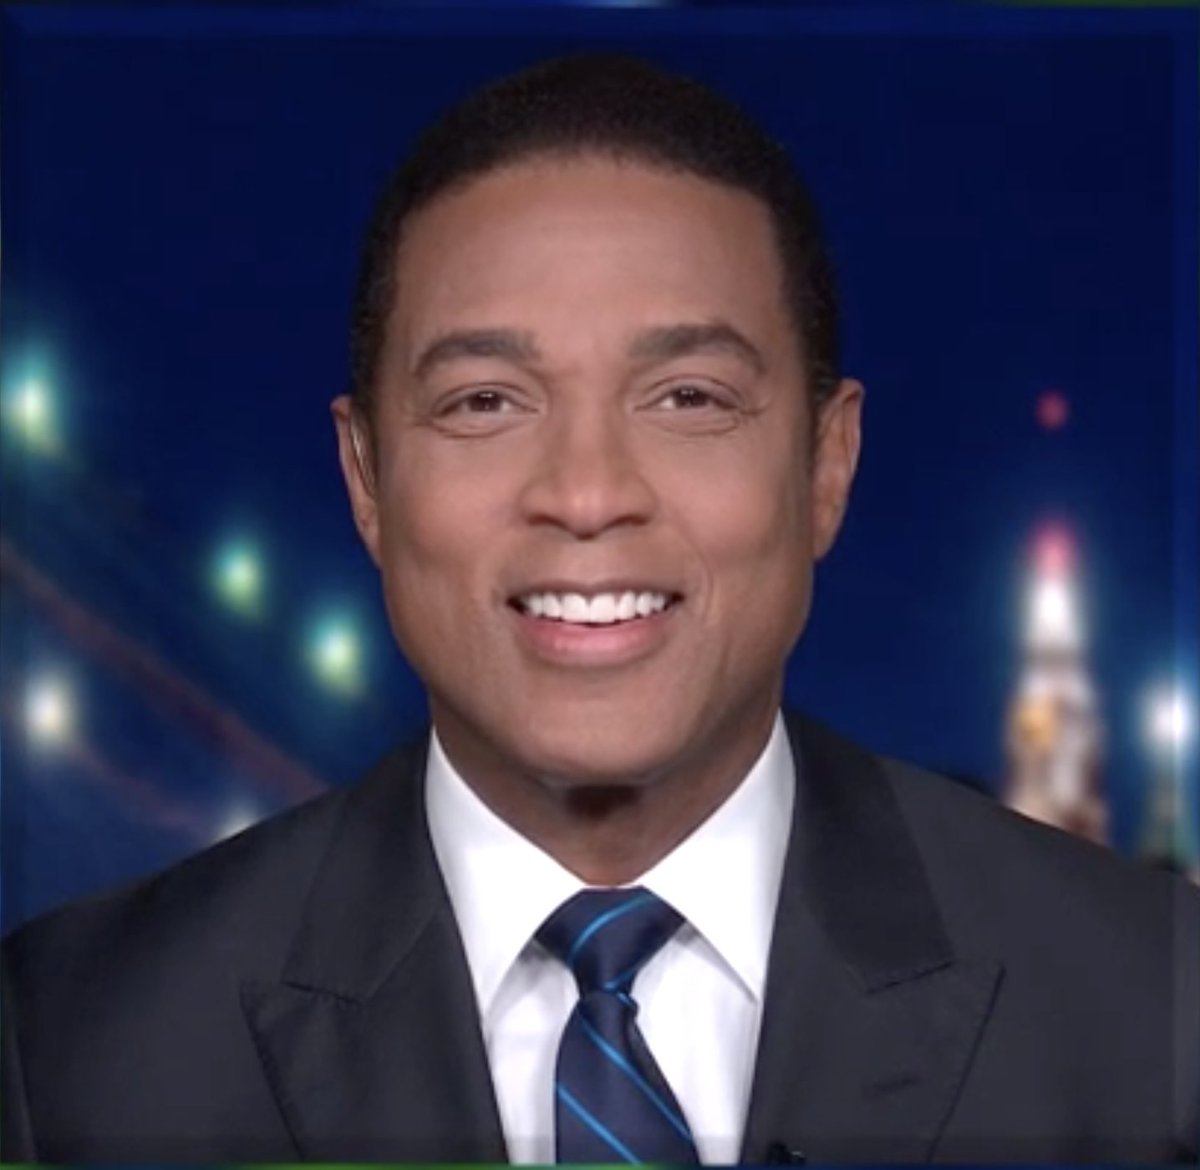 And whenever I do  @donlemon‘s show he always just laughs. With me or at me - I am not entirely sure. (11/12)